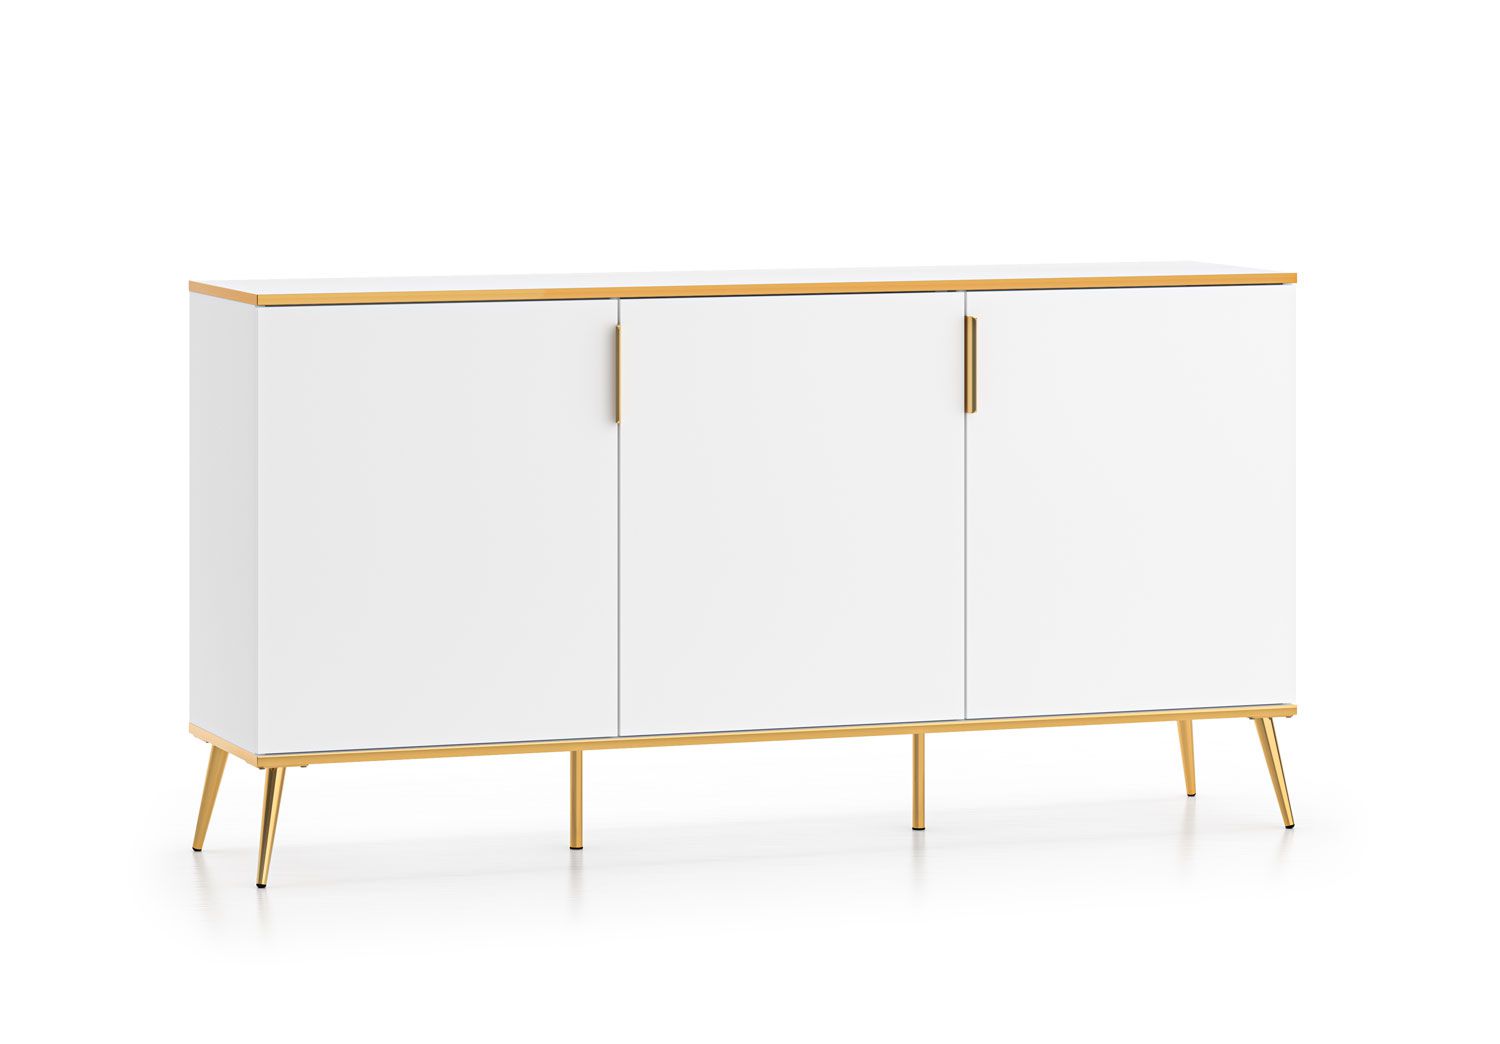 Sideboard / chest of drawers six compartments Breckenridge 04, color: white, soft-close system, dimensions: 88 x 170 x 40 cm, with three doors, push-to-open function